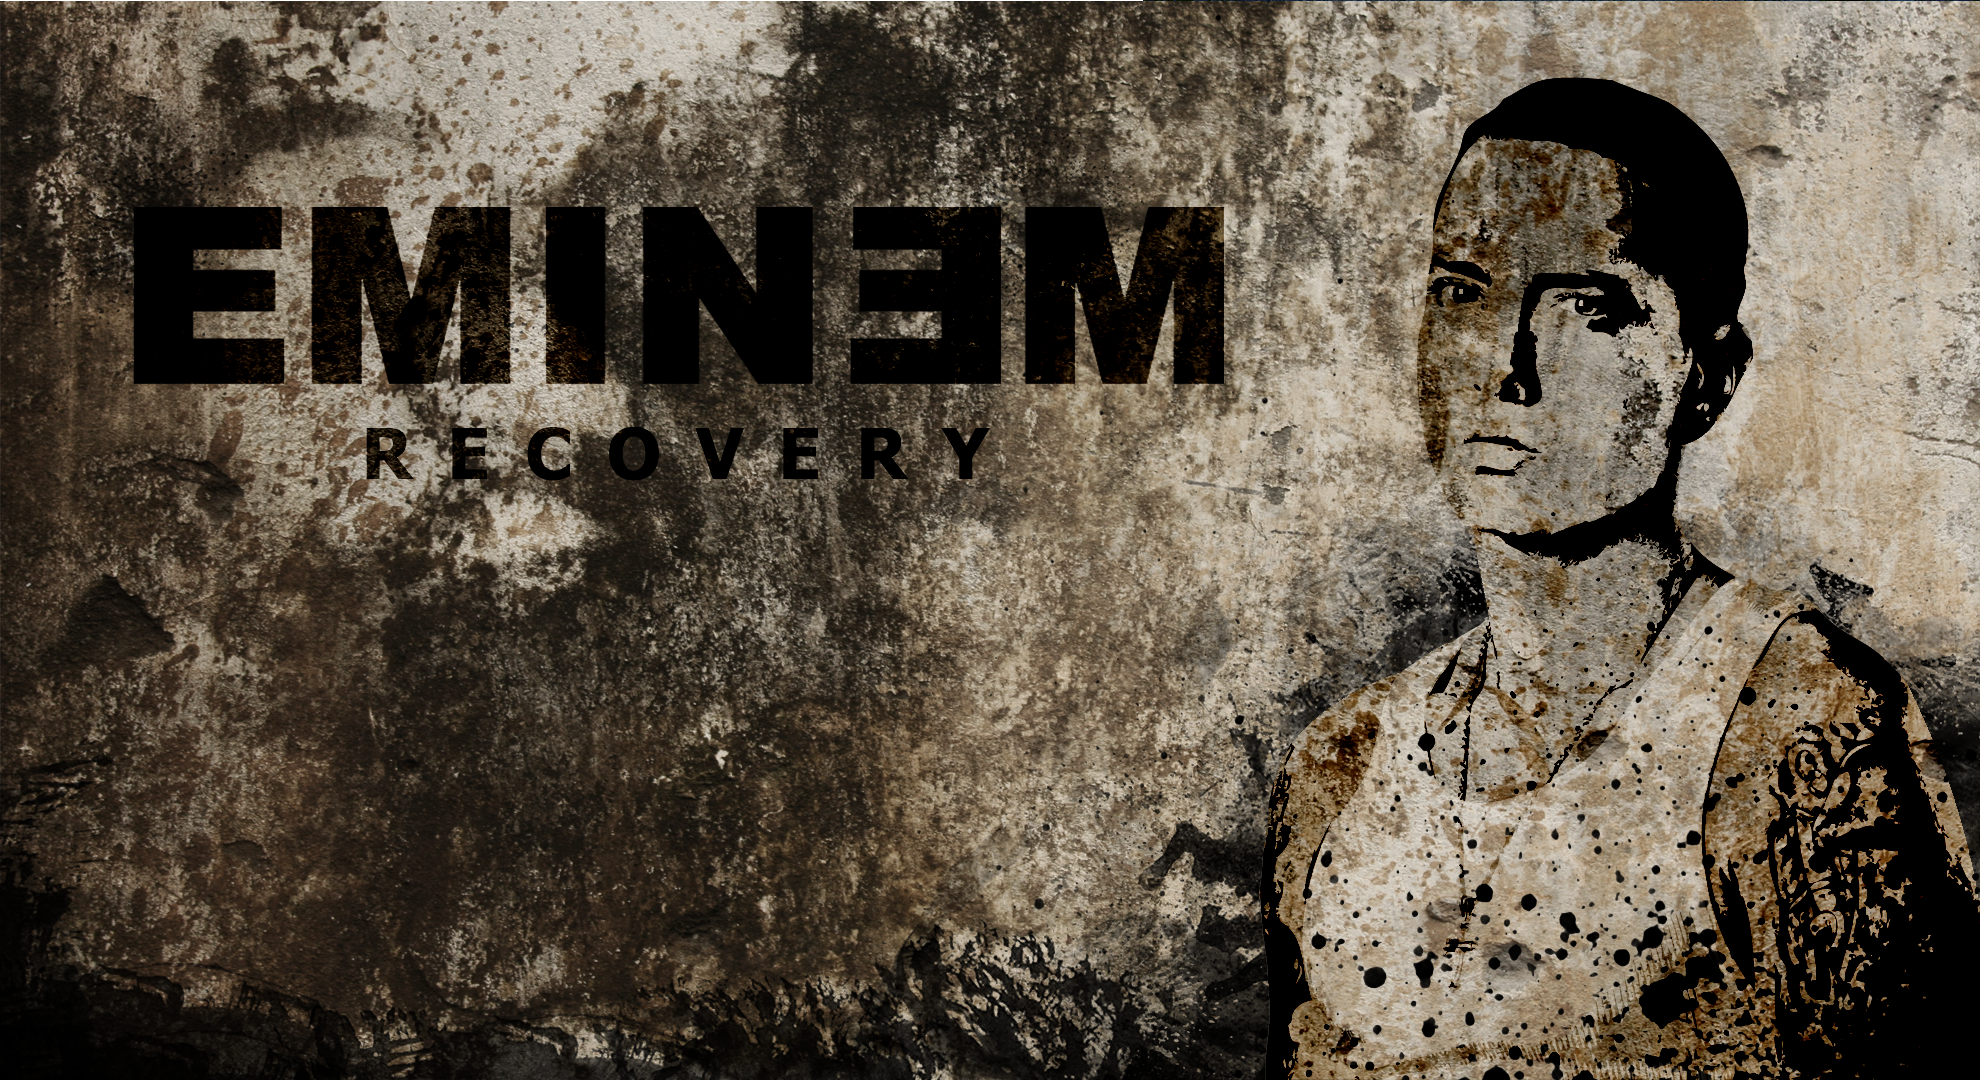 Want Wallpaper Hd Eminem On Your Computer Screen Design - Eminem Wallpaper  Hd - 1980x1080 Wallpaper 